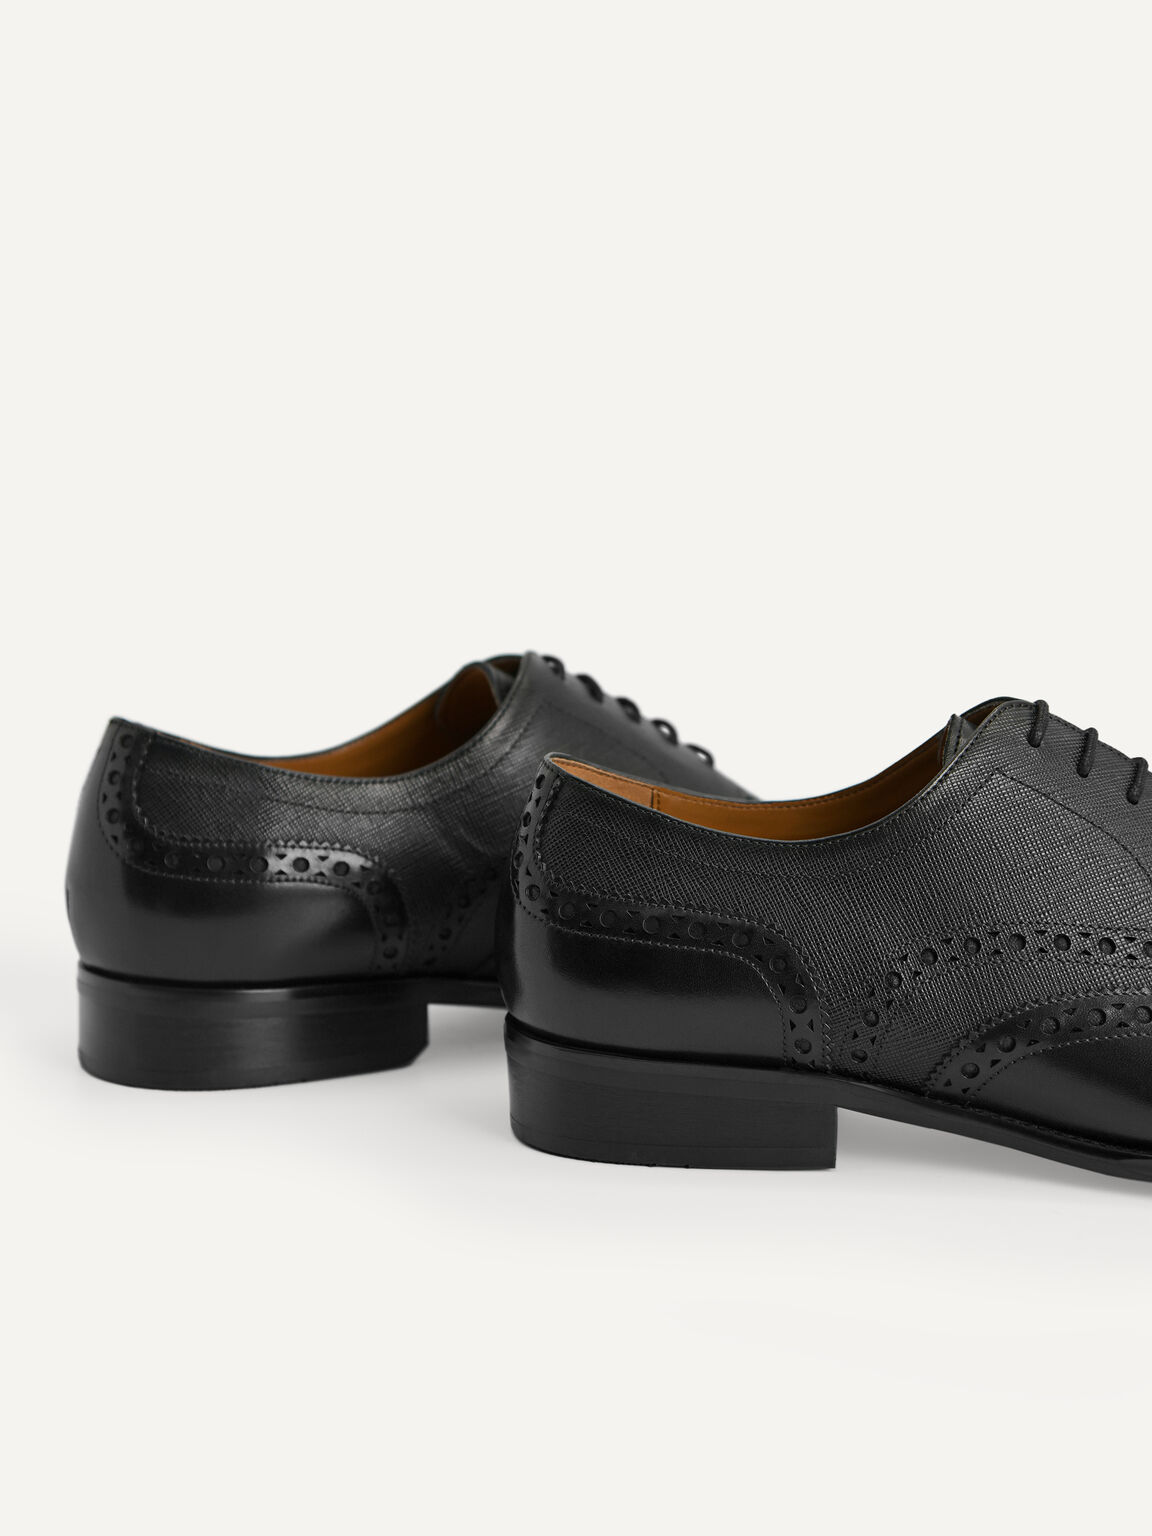 Textured Brogue Oxford Shoes, Black